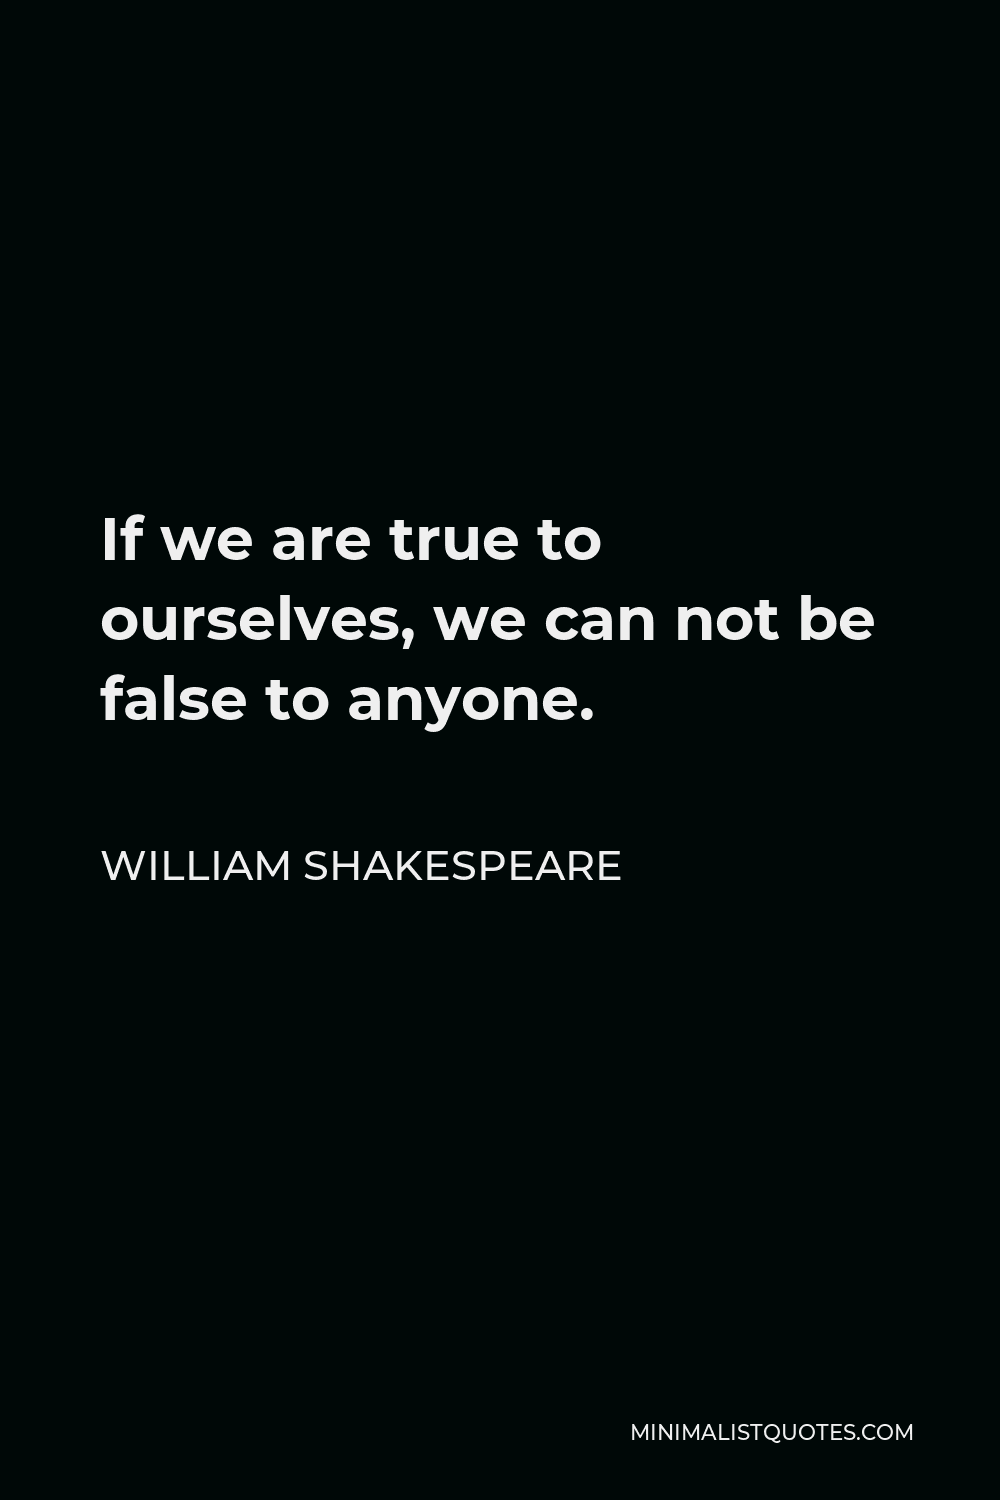 William Shakespeare Quote - If we are true to ourselves, we can not be false to anyone.